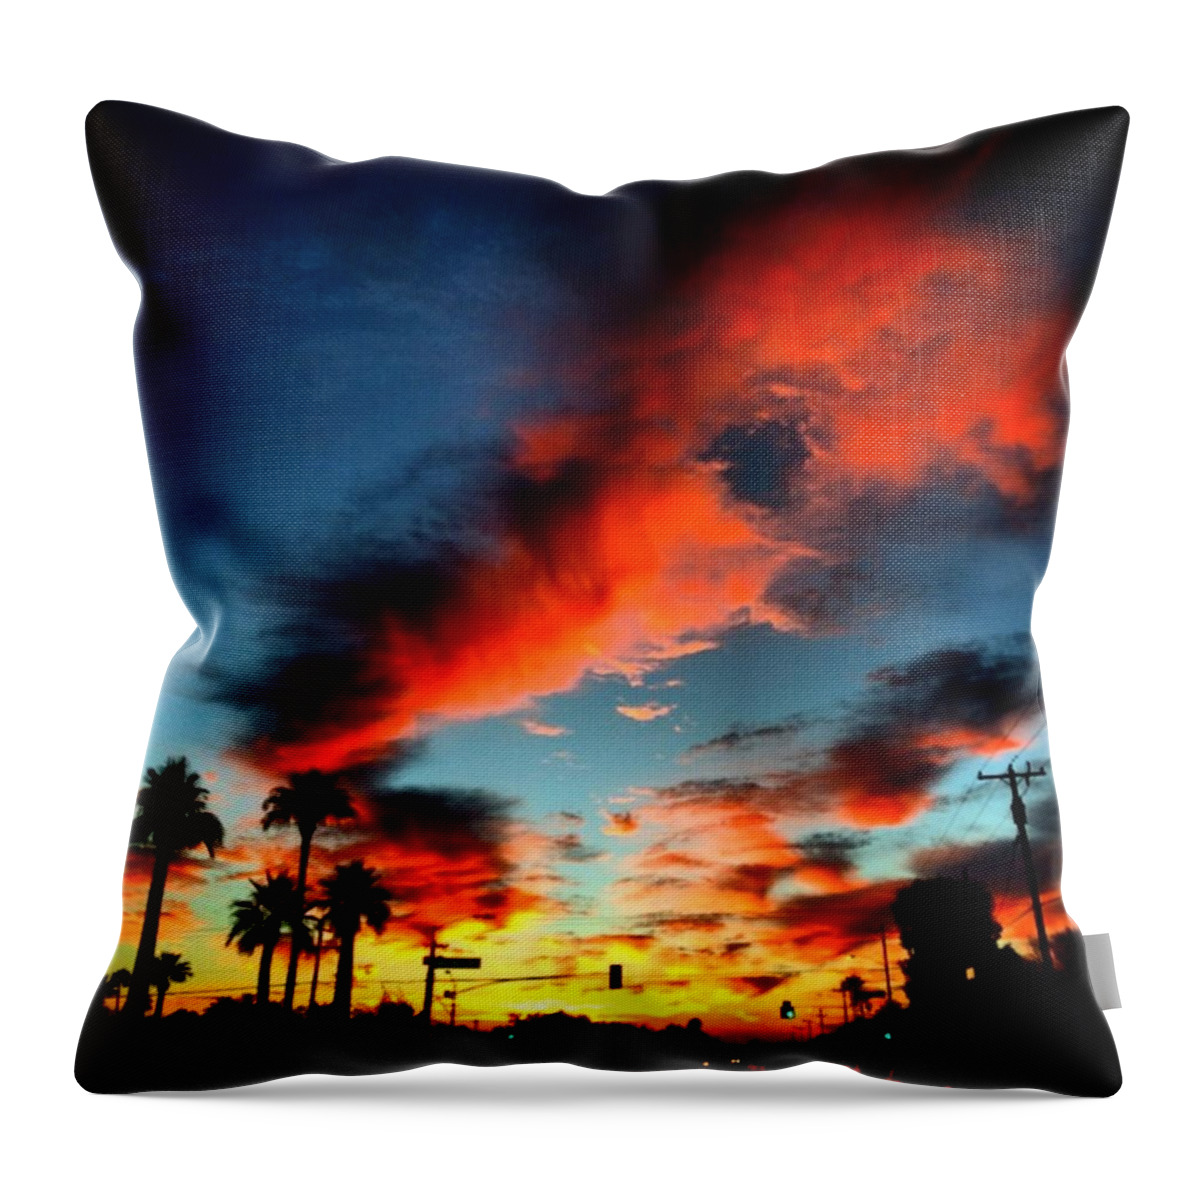 Arizona Throw Pillow featuring the photograph The Warm Glow Of #sunset In #arizona by Gary Sumner